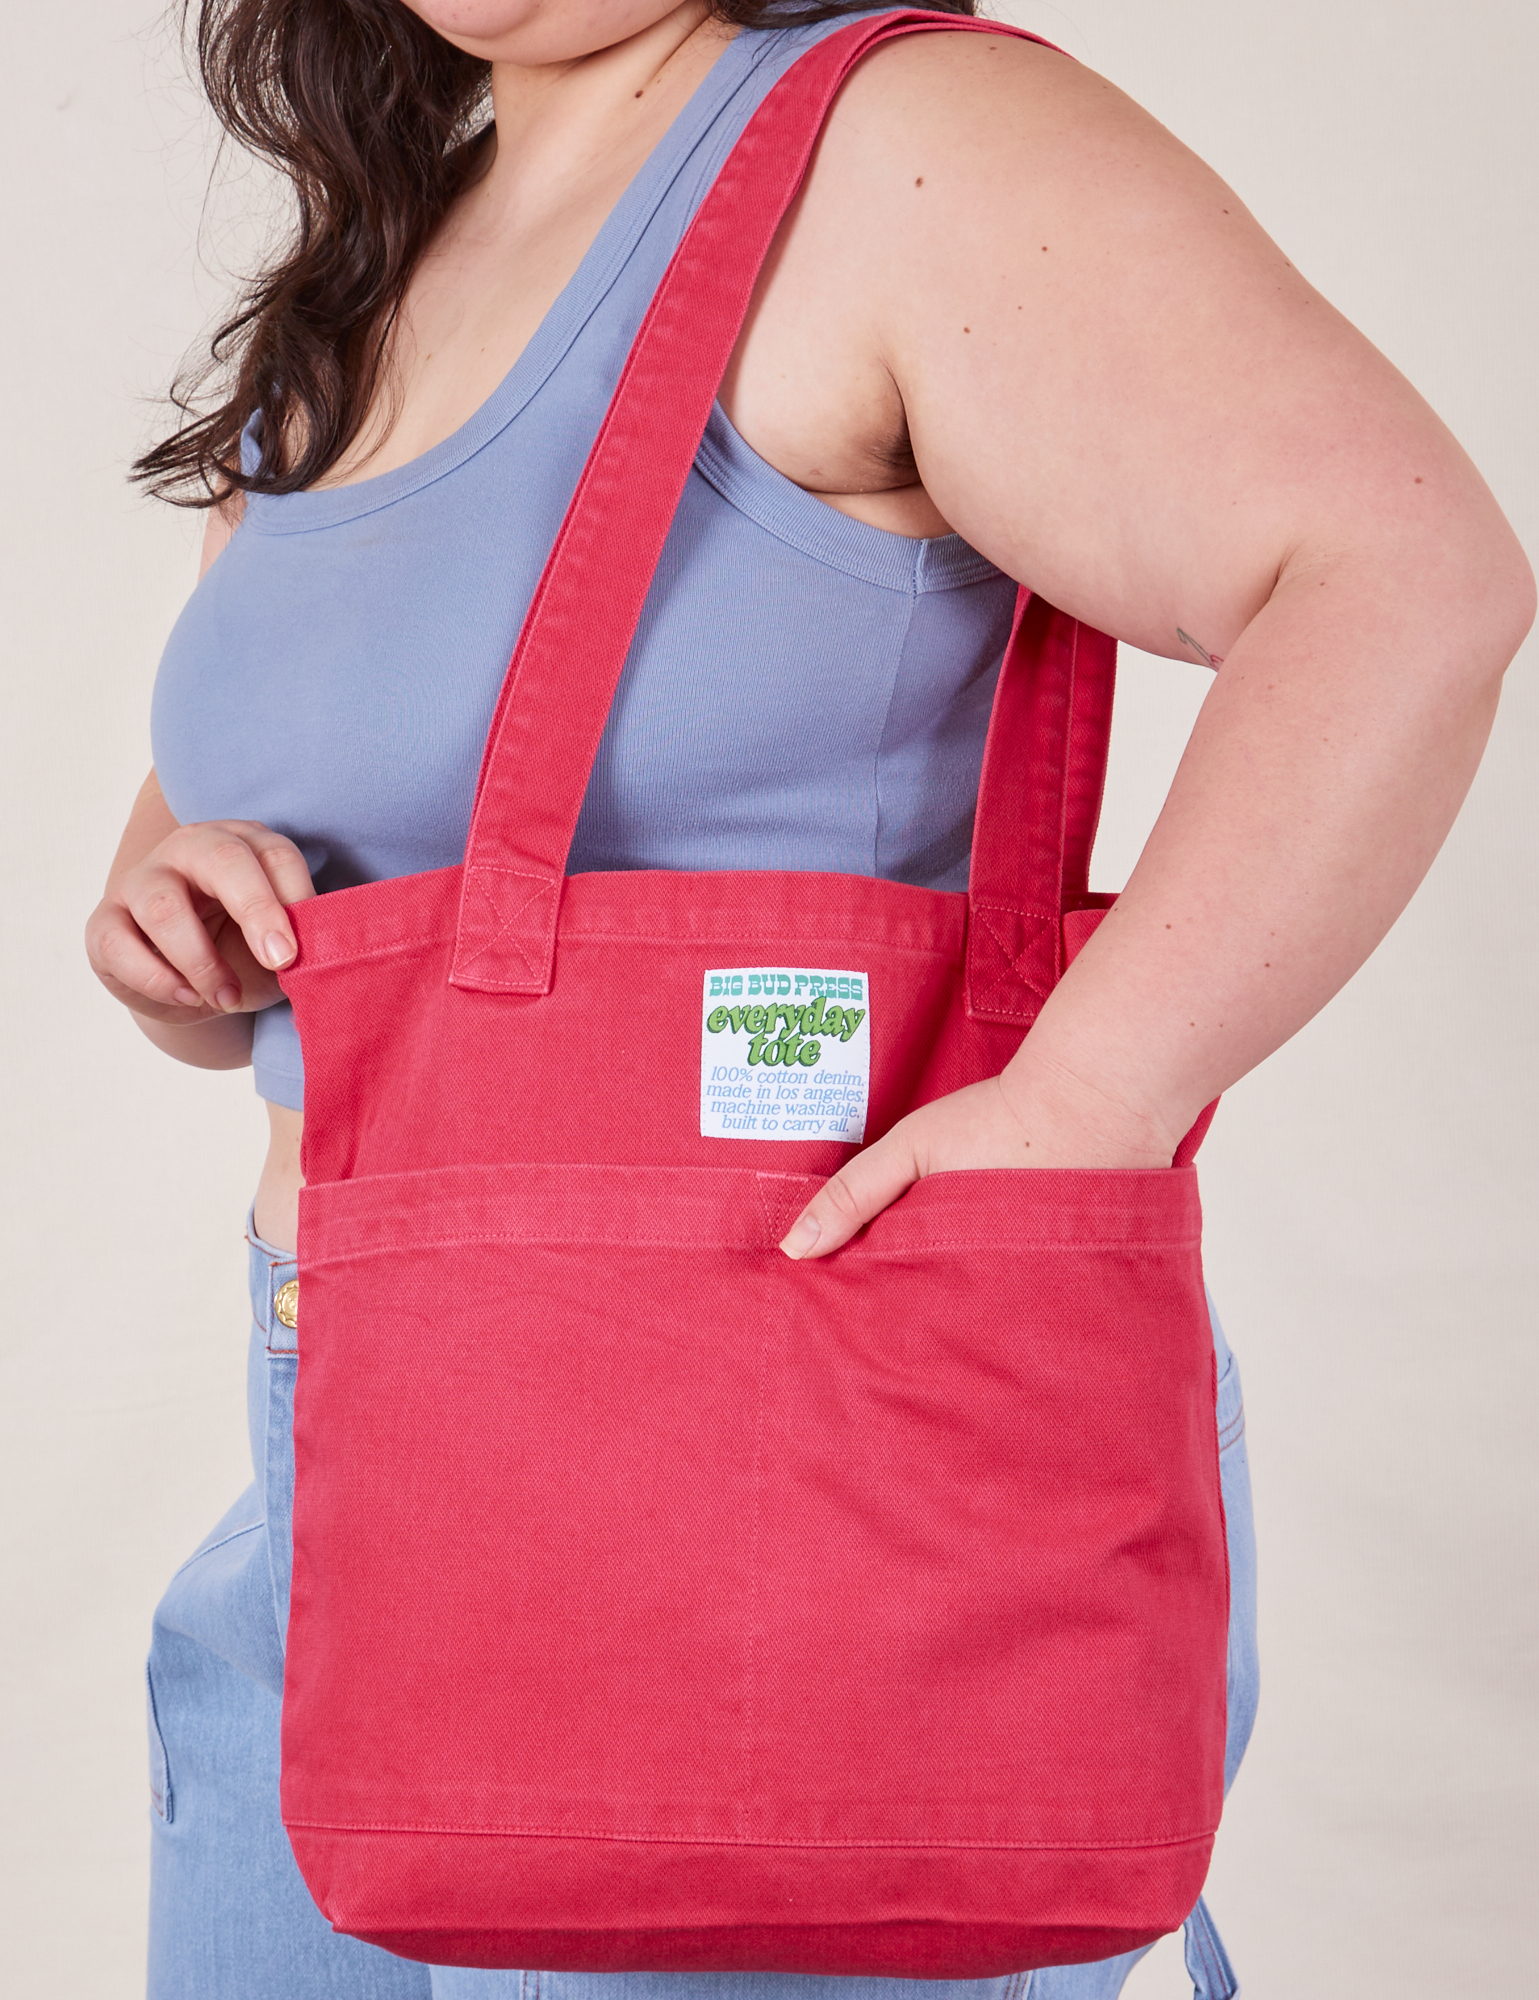 Everyday Tote Bag in Hot Pink worn by model